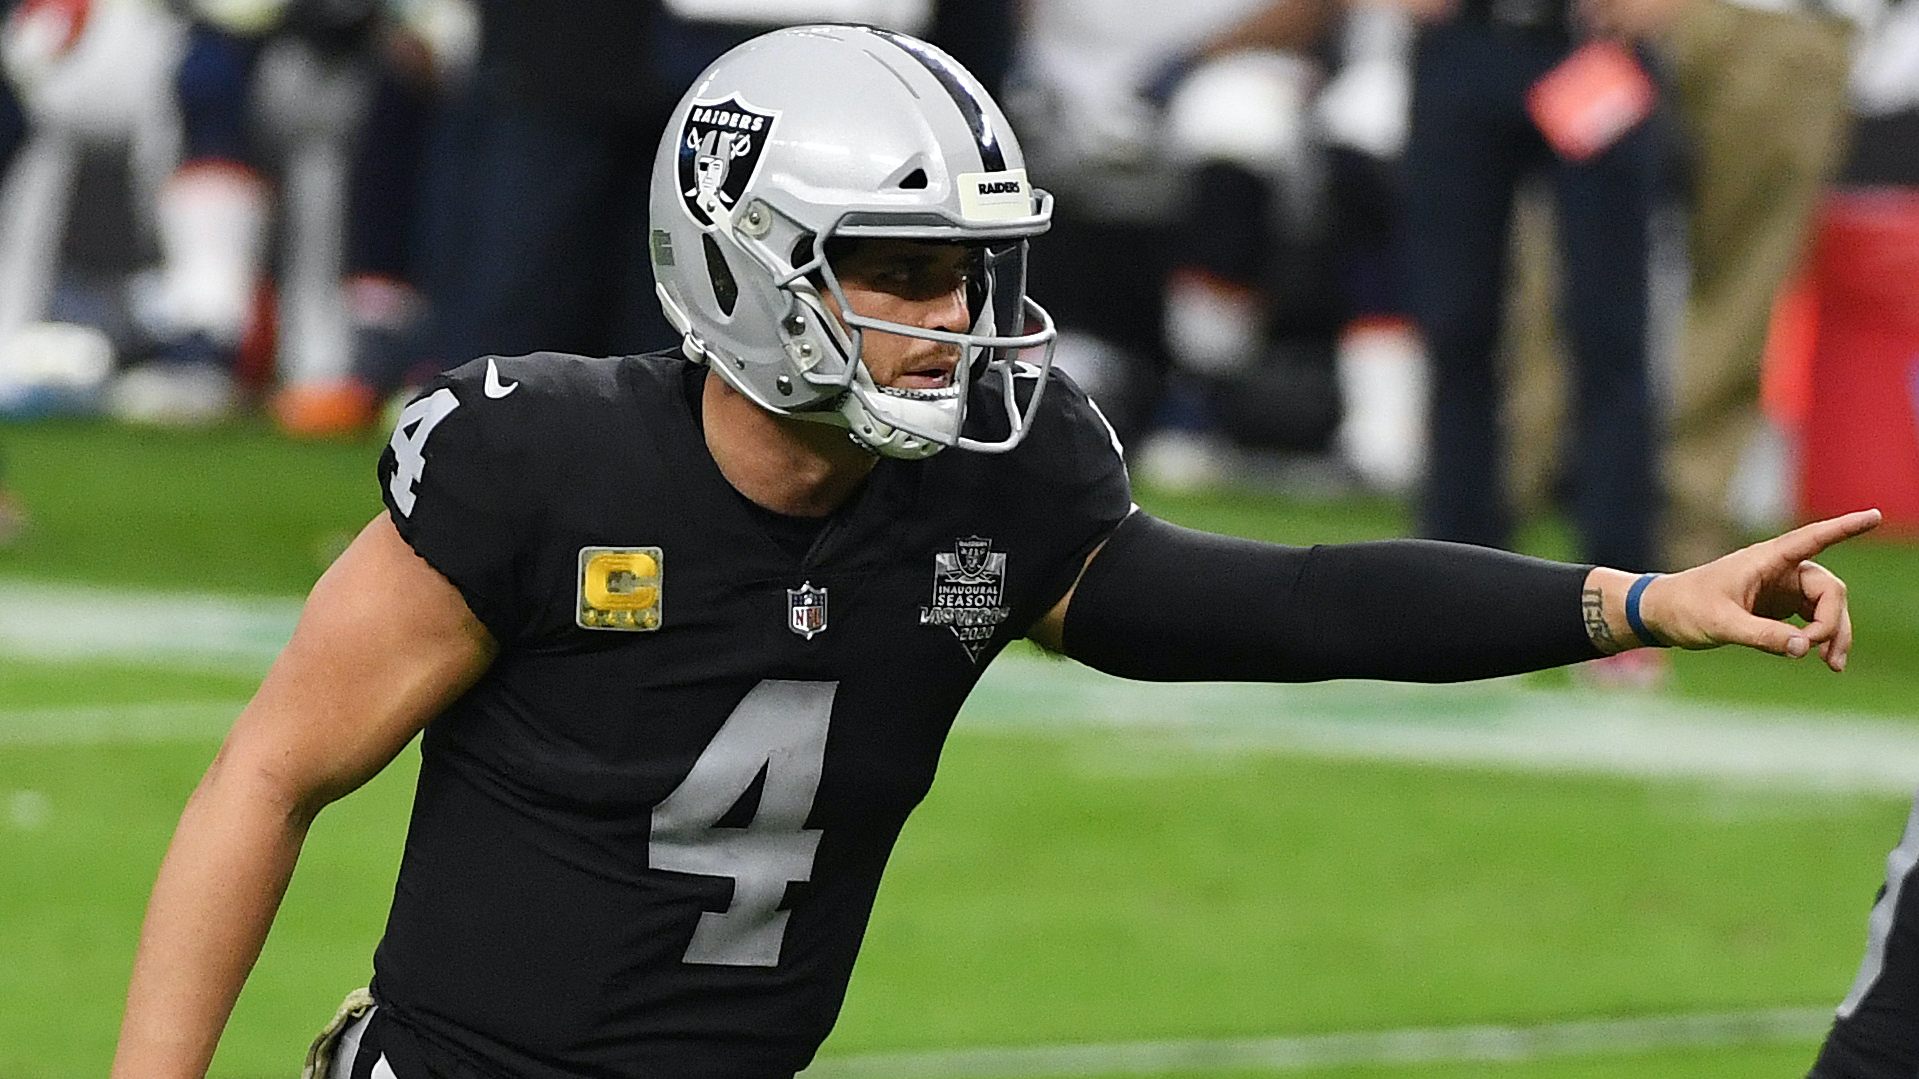 Raiders vs Chargers NFL Week 1: Updated Spread, Picks, Prediction article feature image